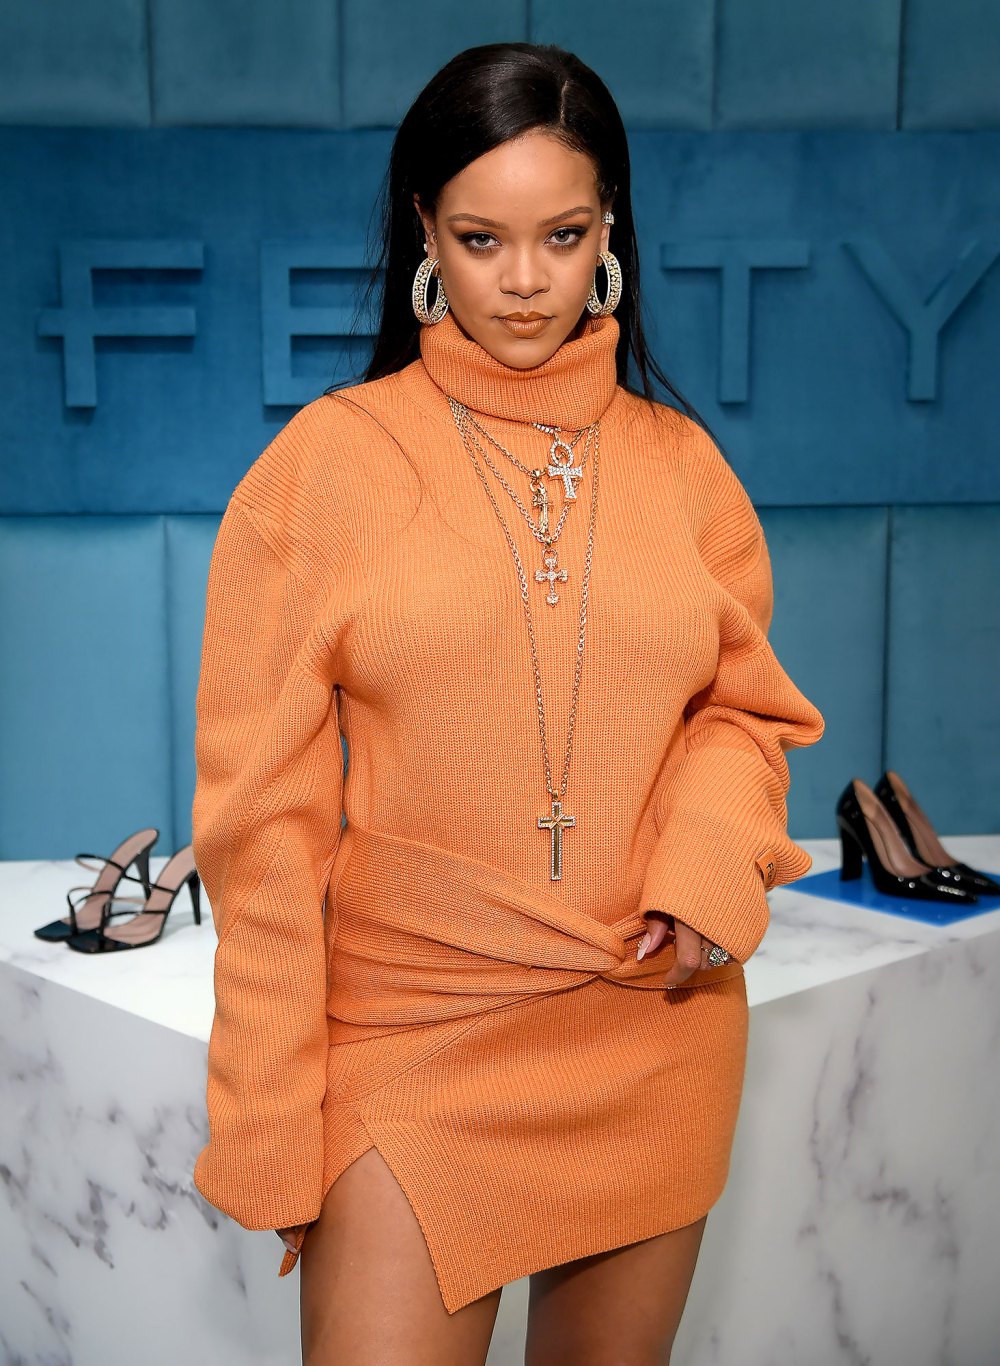 https://www.usmagazine.com/wp-content/uploads/2023/10/Rihanna-Artists-With-the-Most-Number.-1-Songs-on-the-Billboard-Hot-100-Chart.jpg?w=1000&quality=86&strip=all